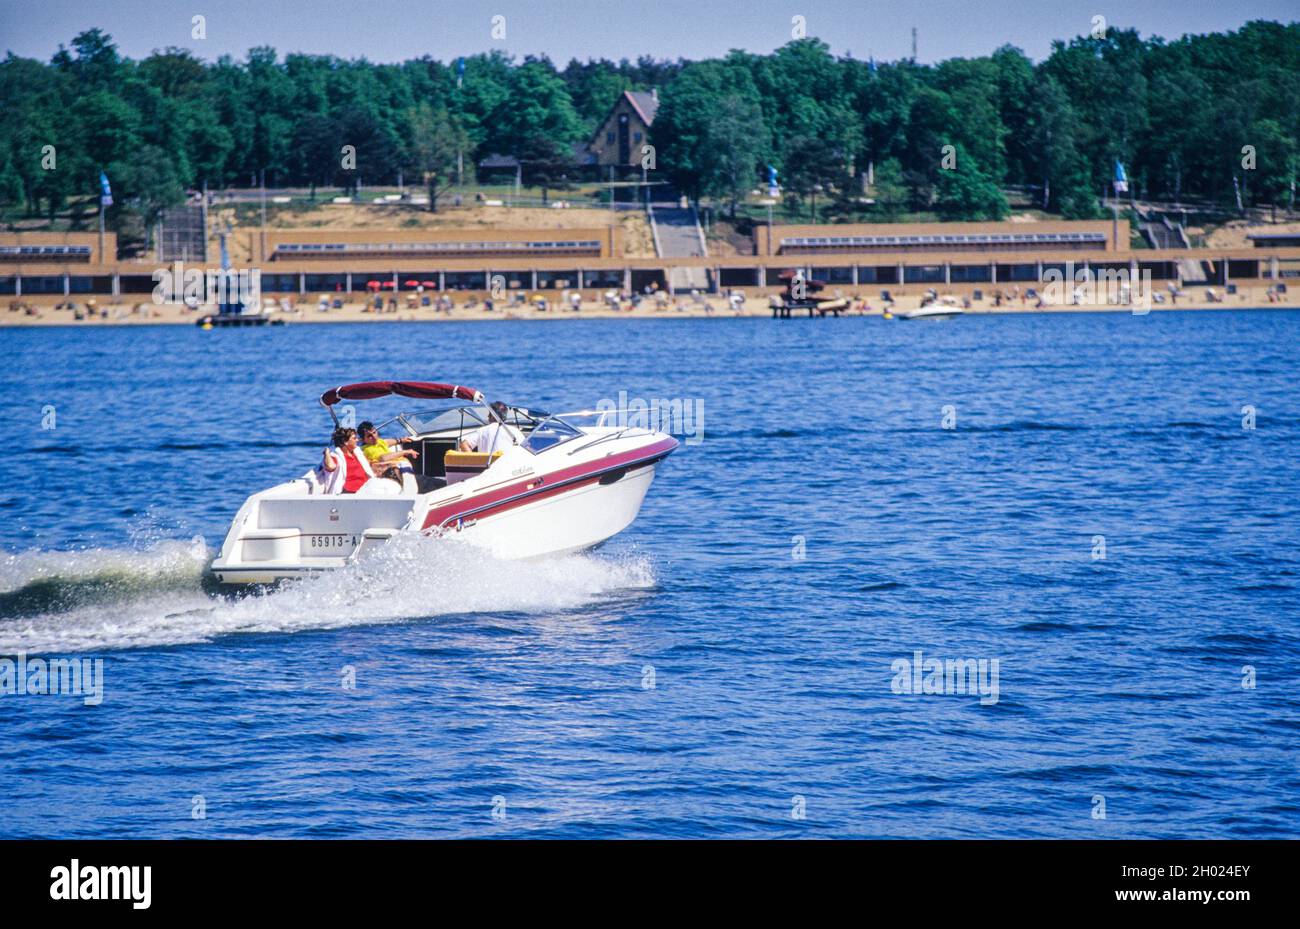 Summer in Berlin: motor-boat in front of the listed buildings of Wannsee public bathing beach. Stock Photo